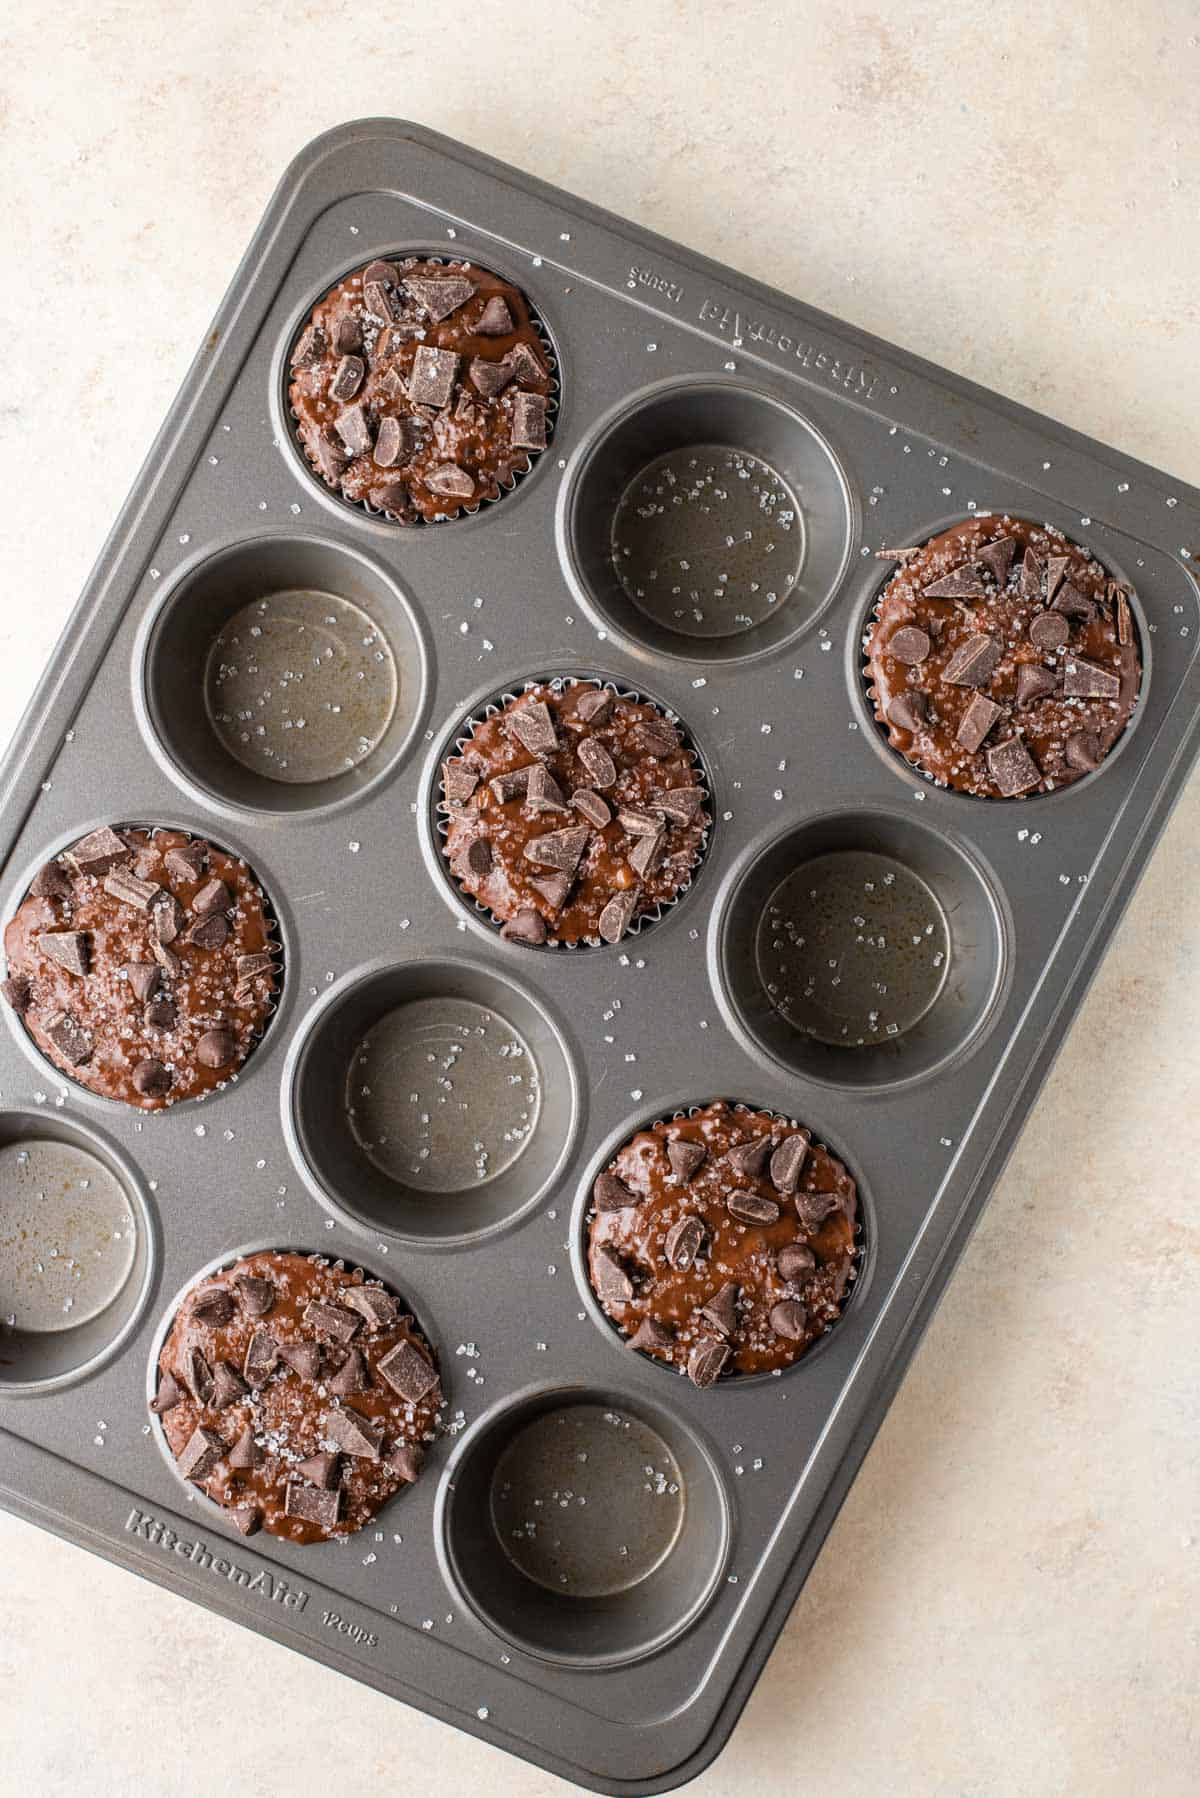 every other hole in muffin pan filled with chocolate batter